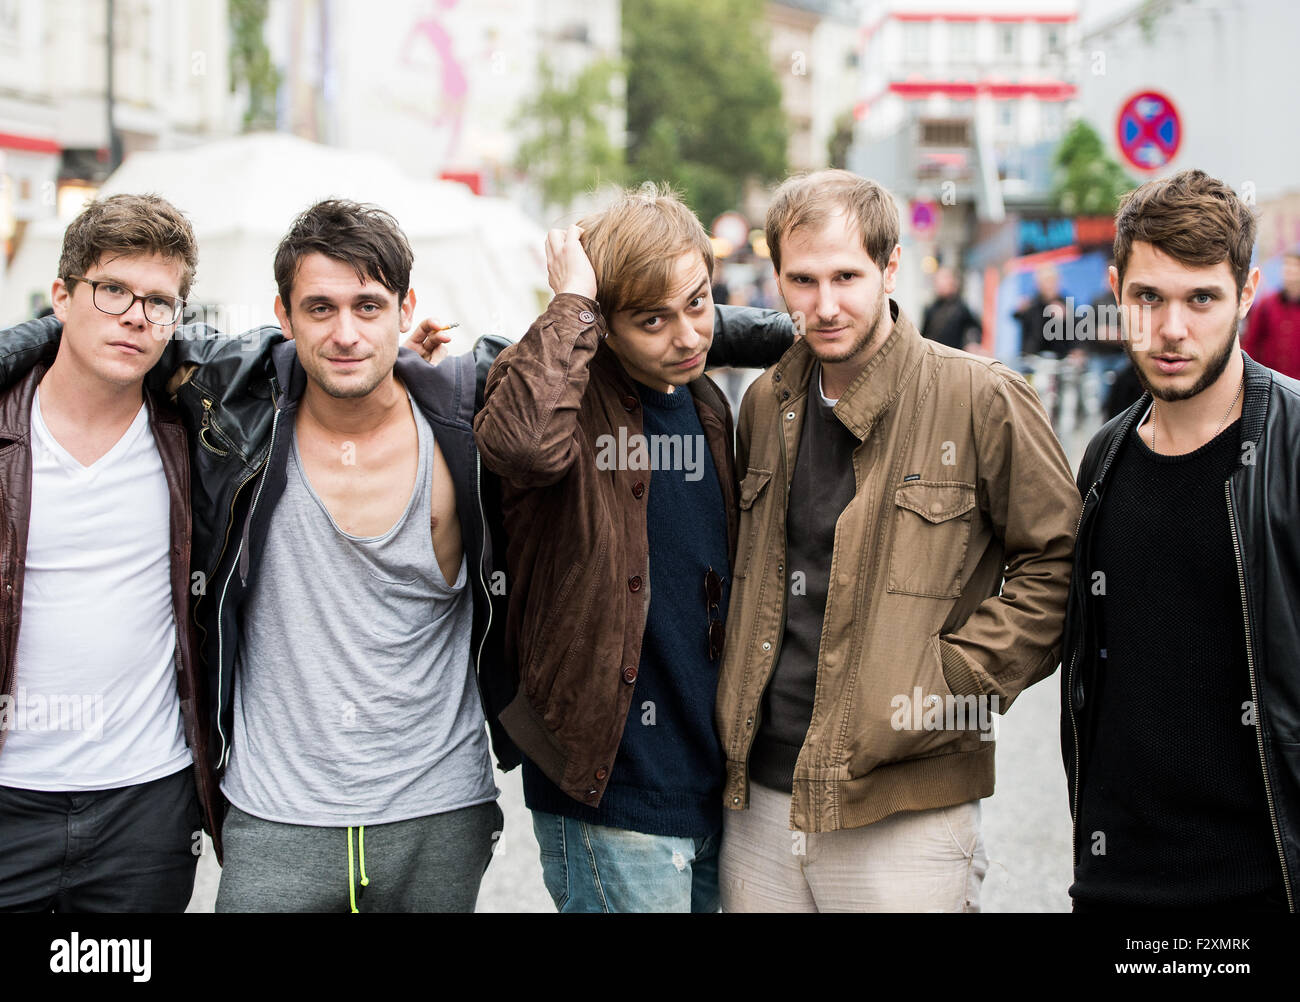 Hamburg, Germany. 24th Sep, 2015. Musicians Lukas Hasitschka (l-r), Manuel  Christoph Poppe, Reinhold Weber, Michael Marco Fitzthum (stage name: Marco  Michael Wanda) and Christian Hummer of Austrian band Wanda pose on the